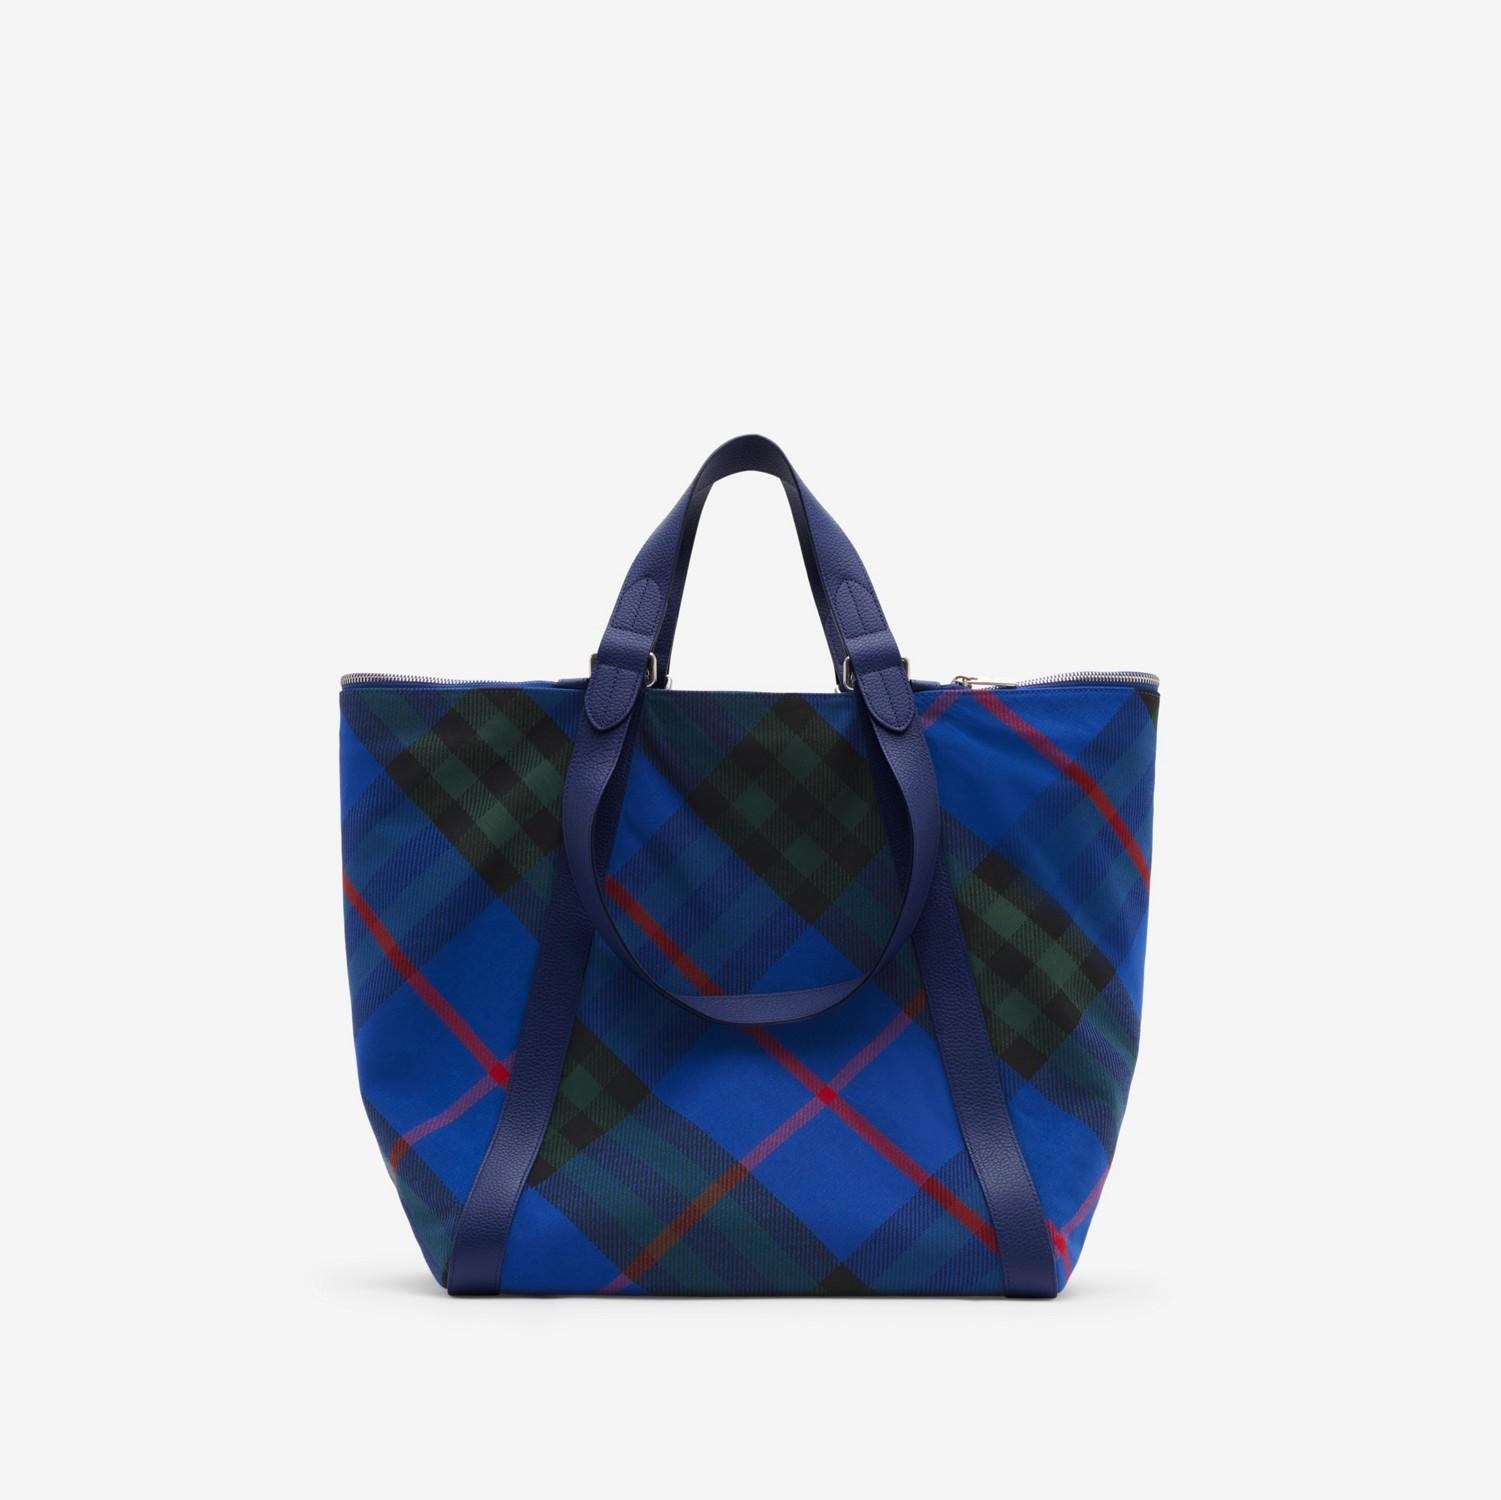 Medium Field Tote by BURBERRY